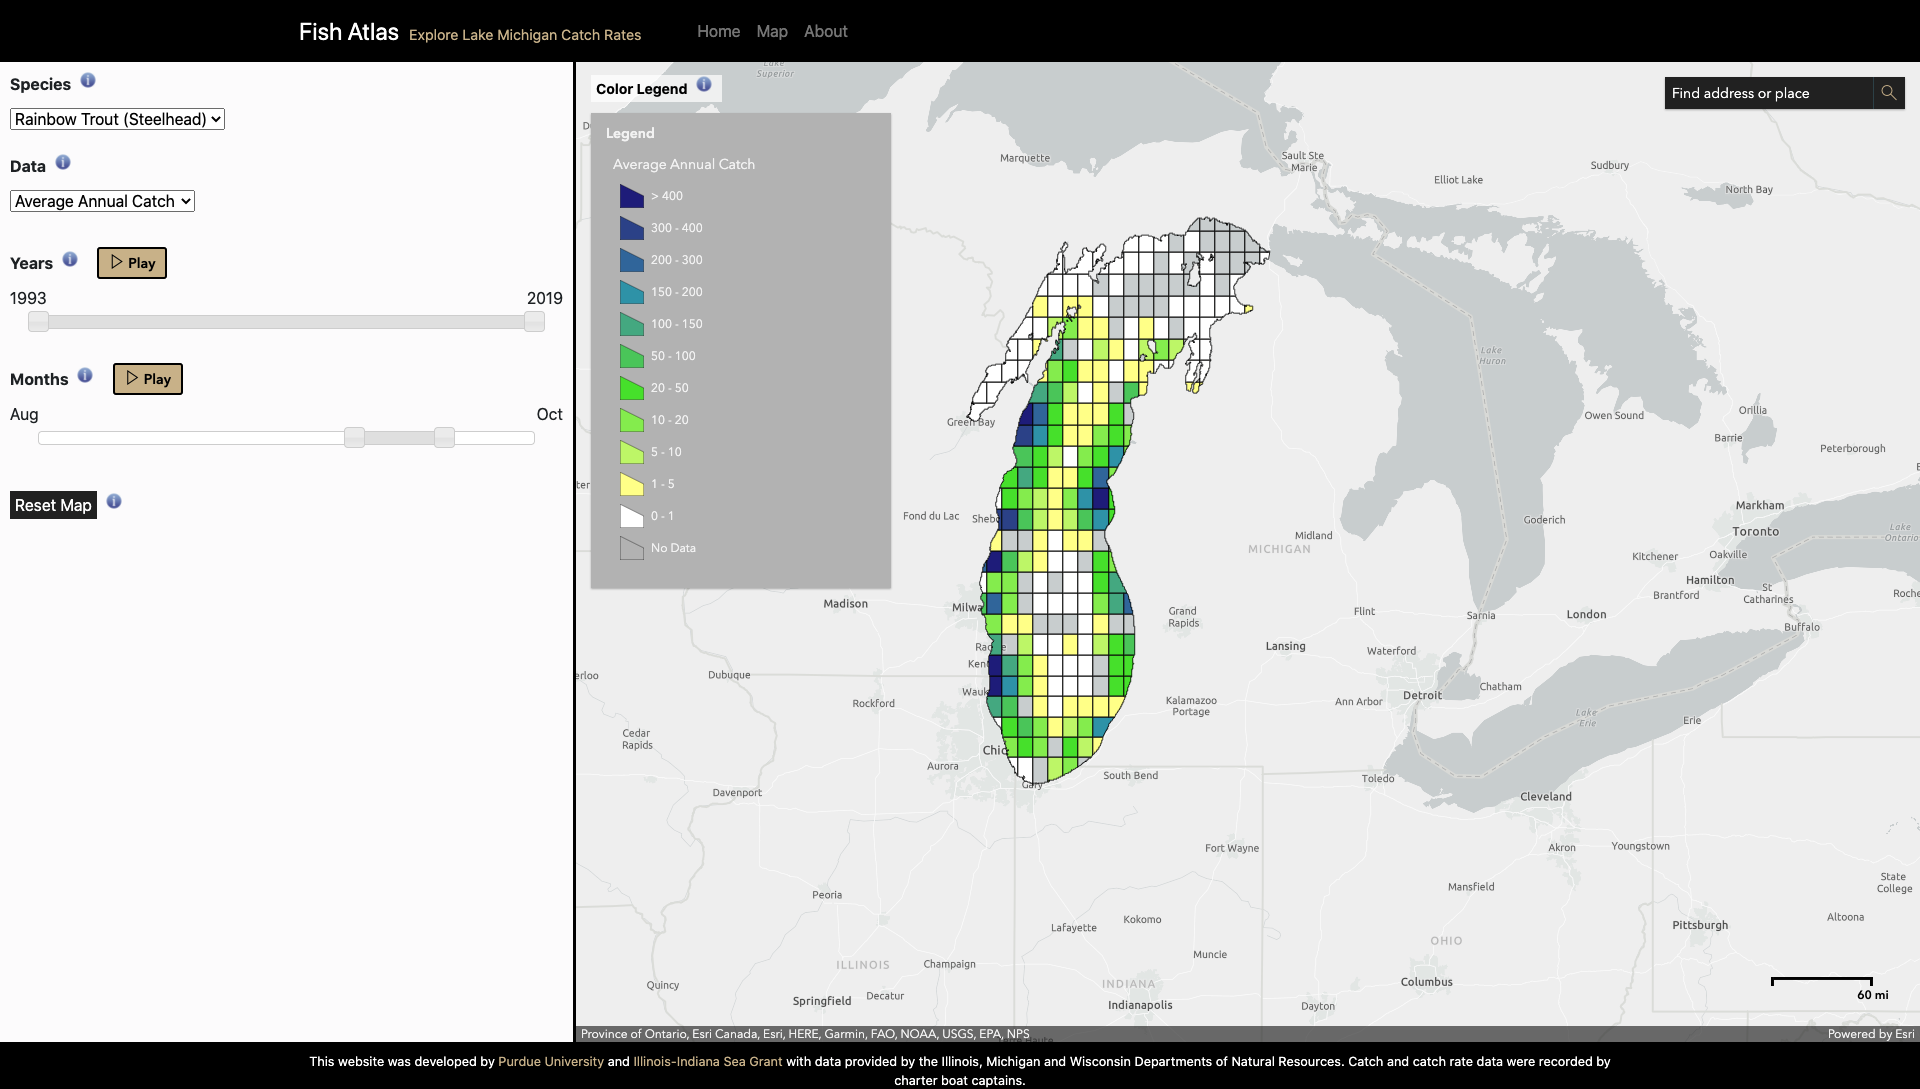 Gridded map of Lake Michigan shows average annual catch of Rainbow Trout (Steelhead) between August and October from 1993 - 2019.